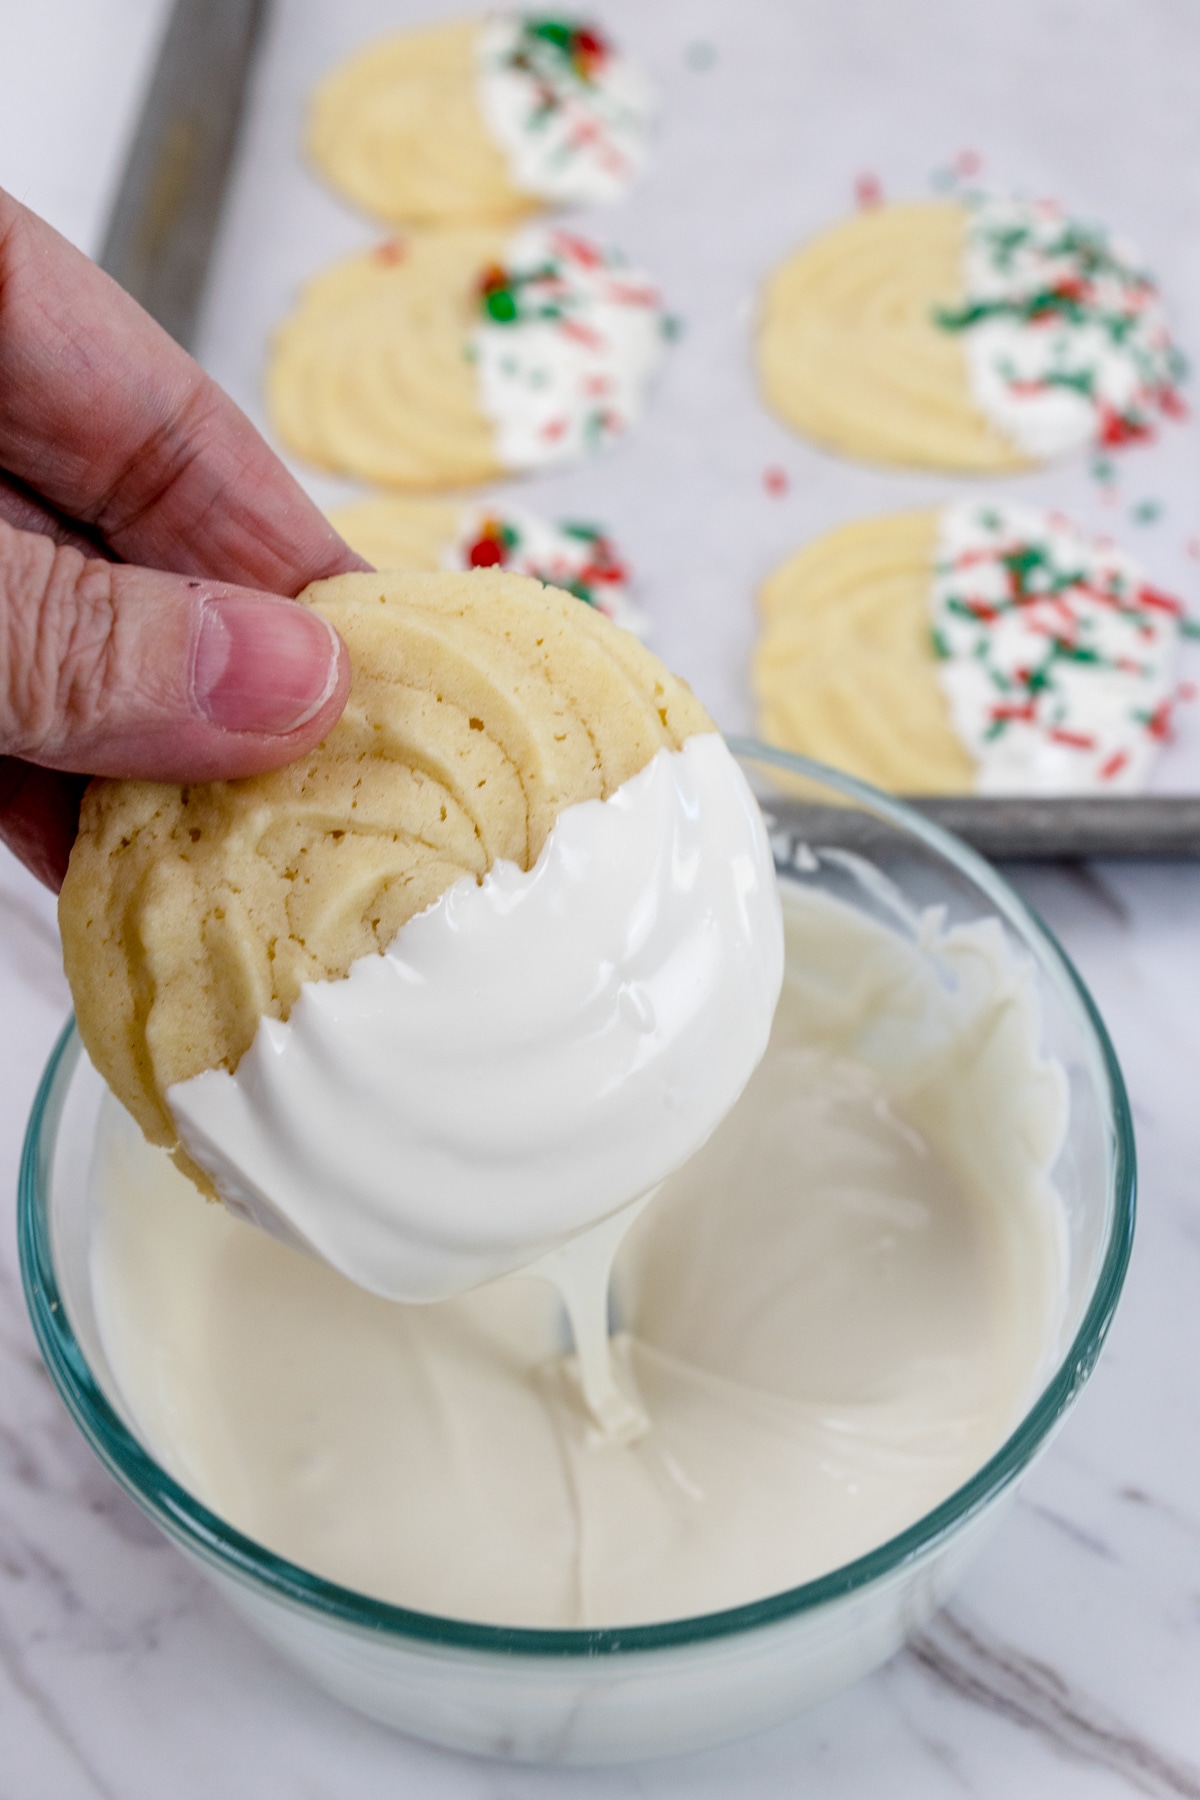 A butter cookie being dipped into melted white chocolate.